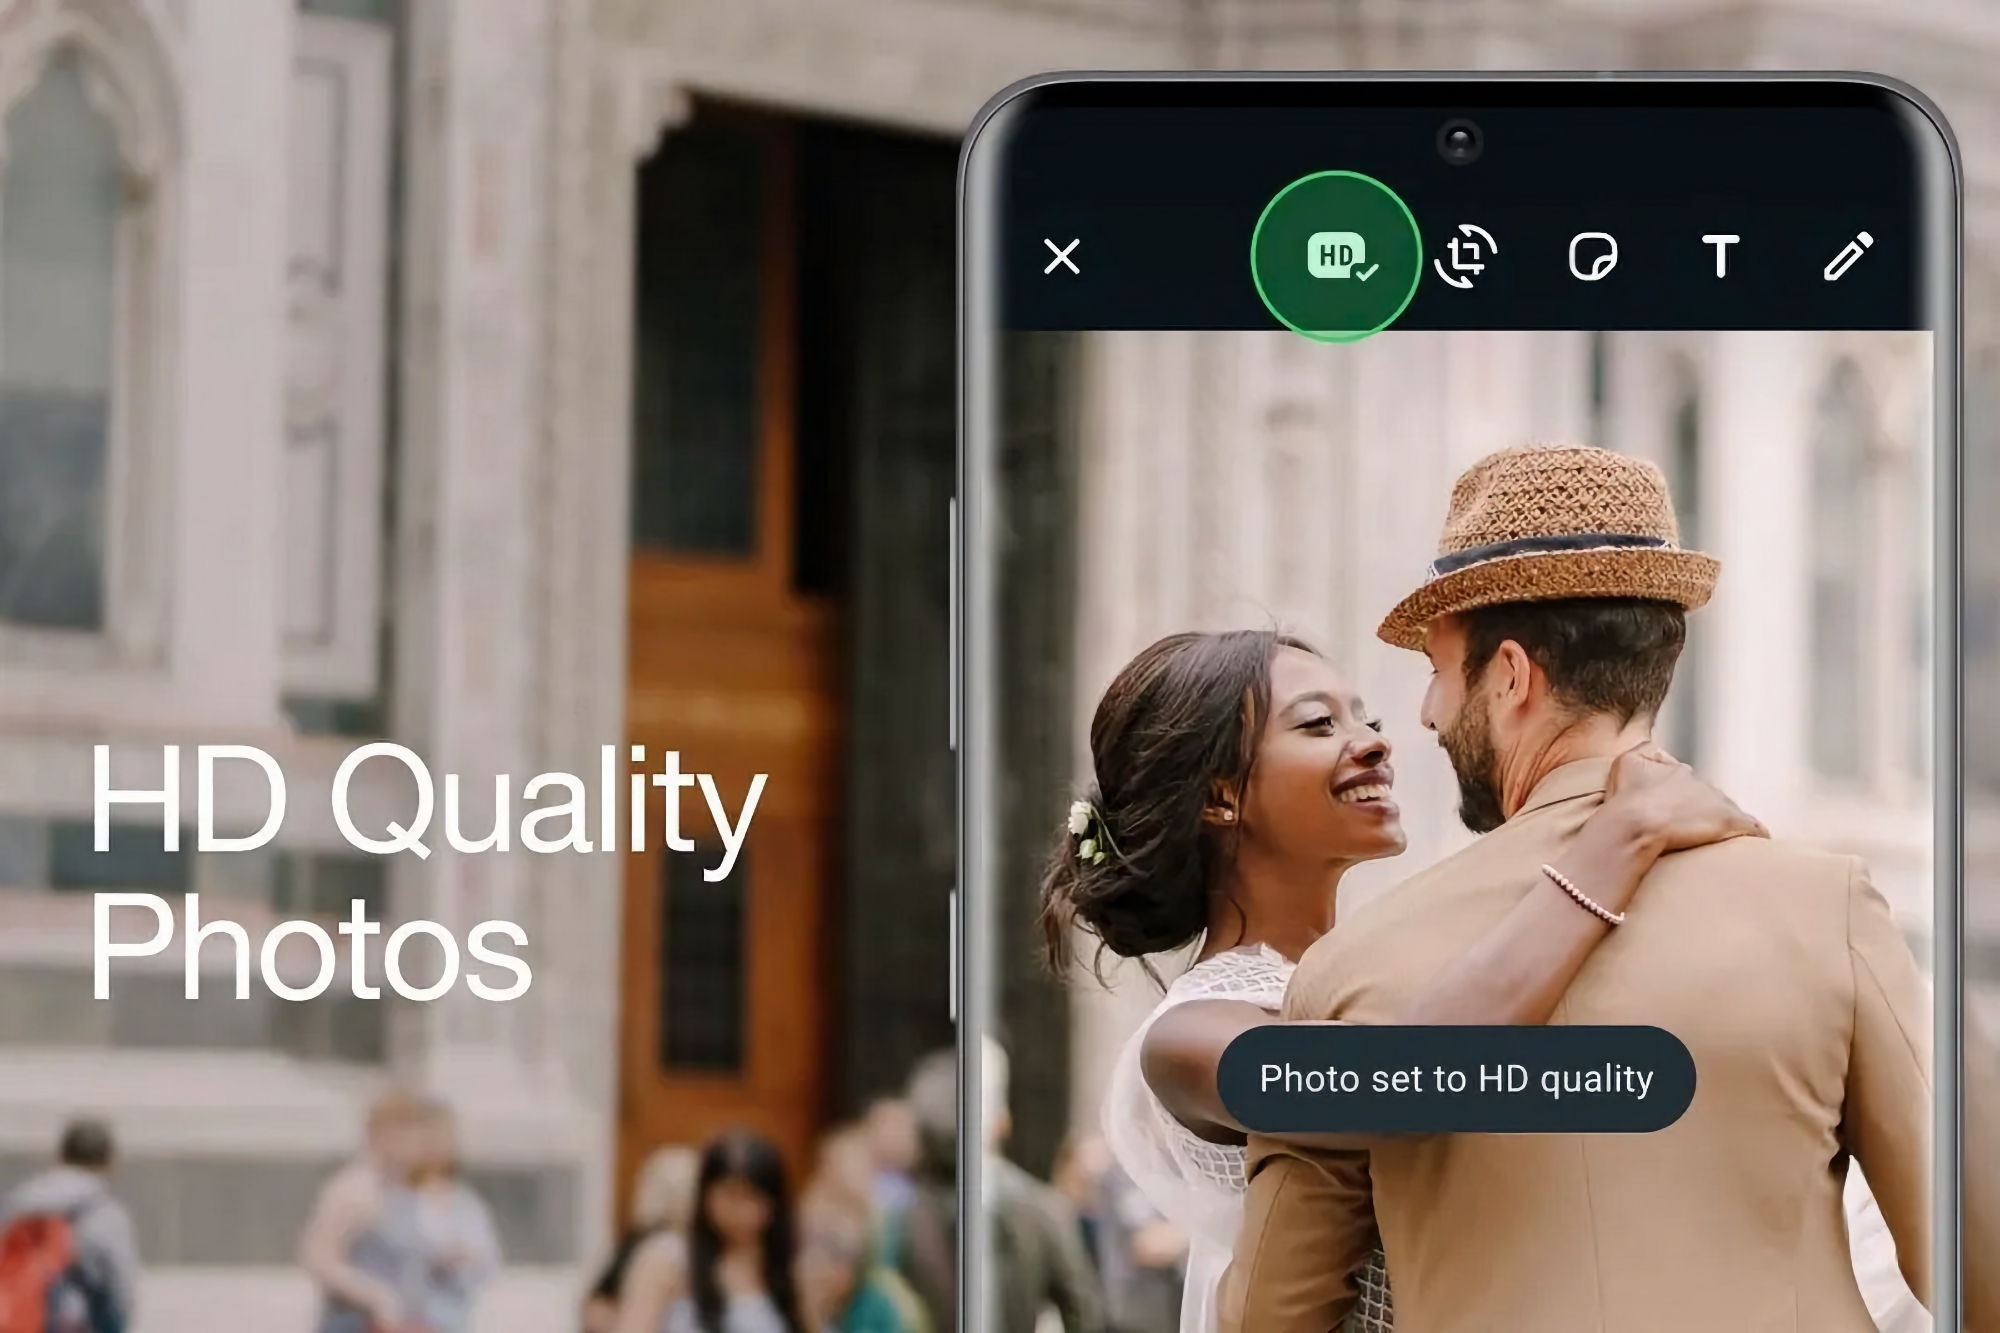 WhatsApp users on Android and iOS can now send images in good quality